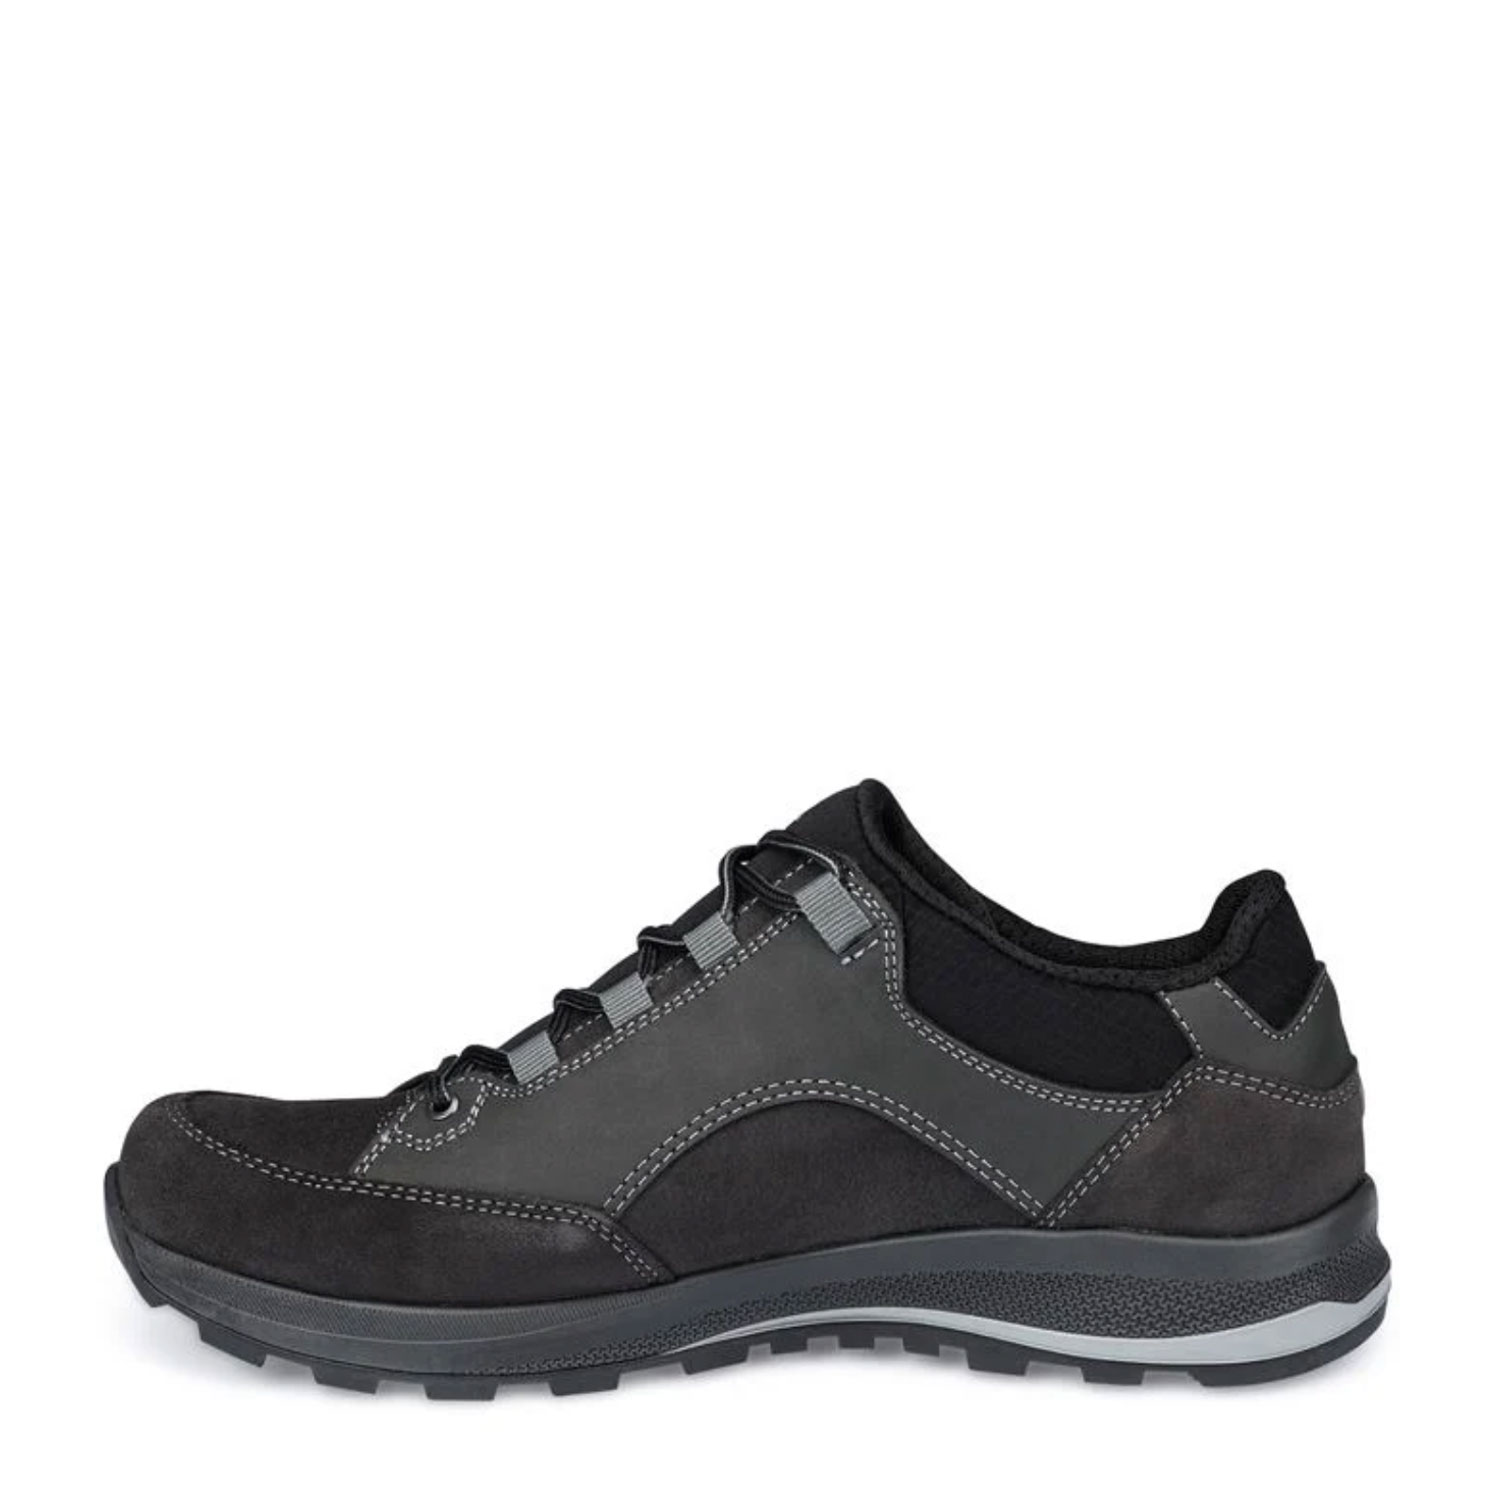 Uni Marque  UK 11.5 HanwagHanwag Homme Banks Low GTX Chaussures 